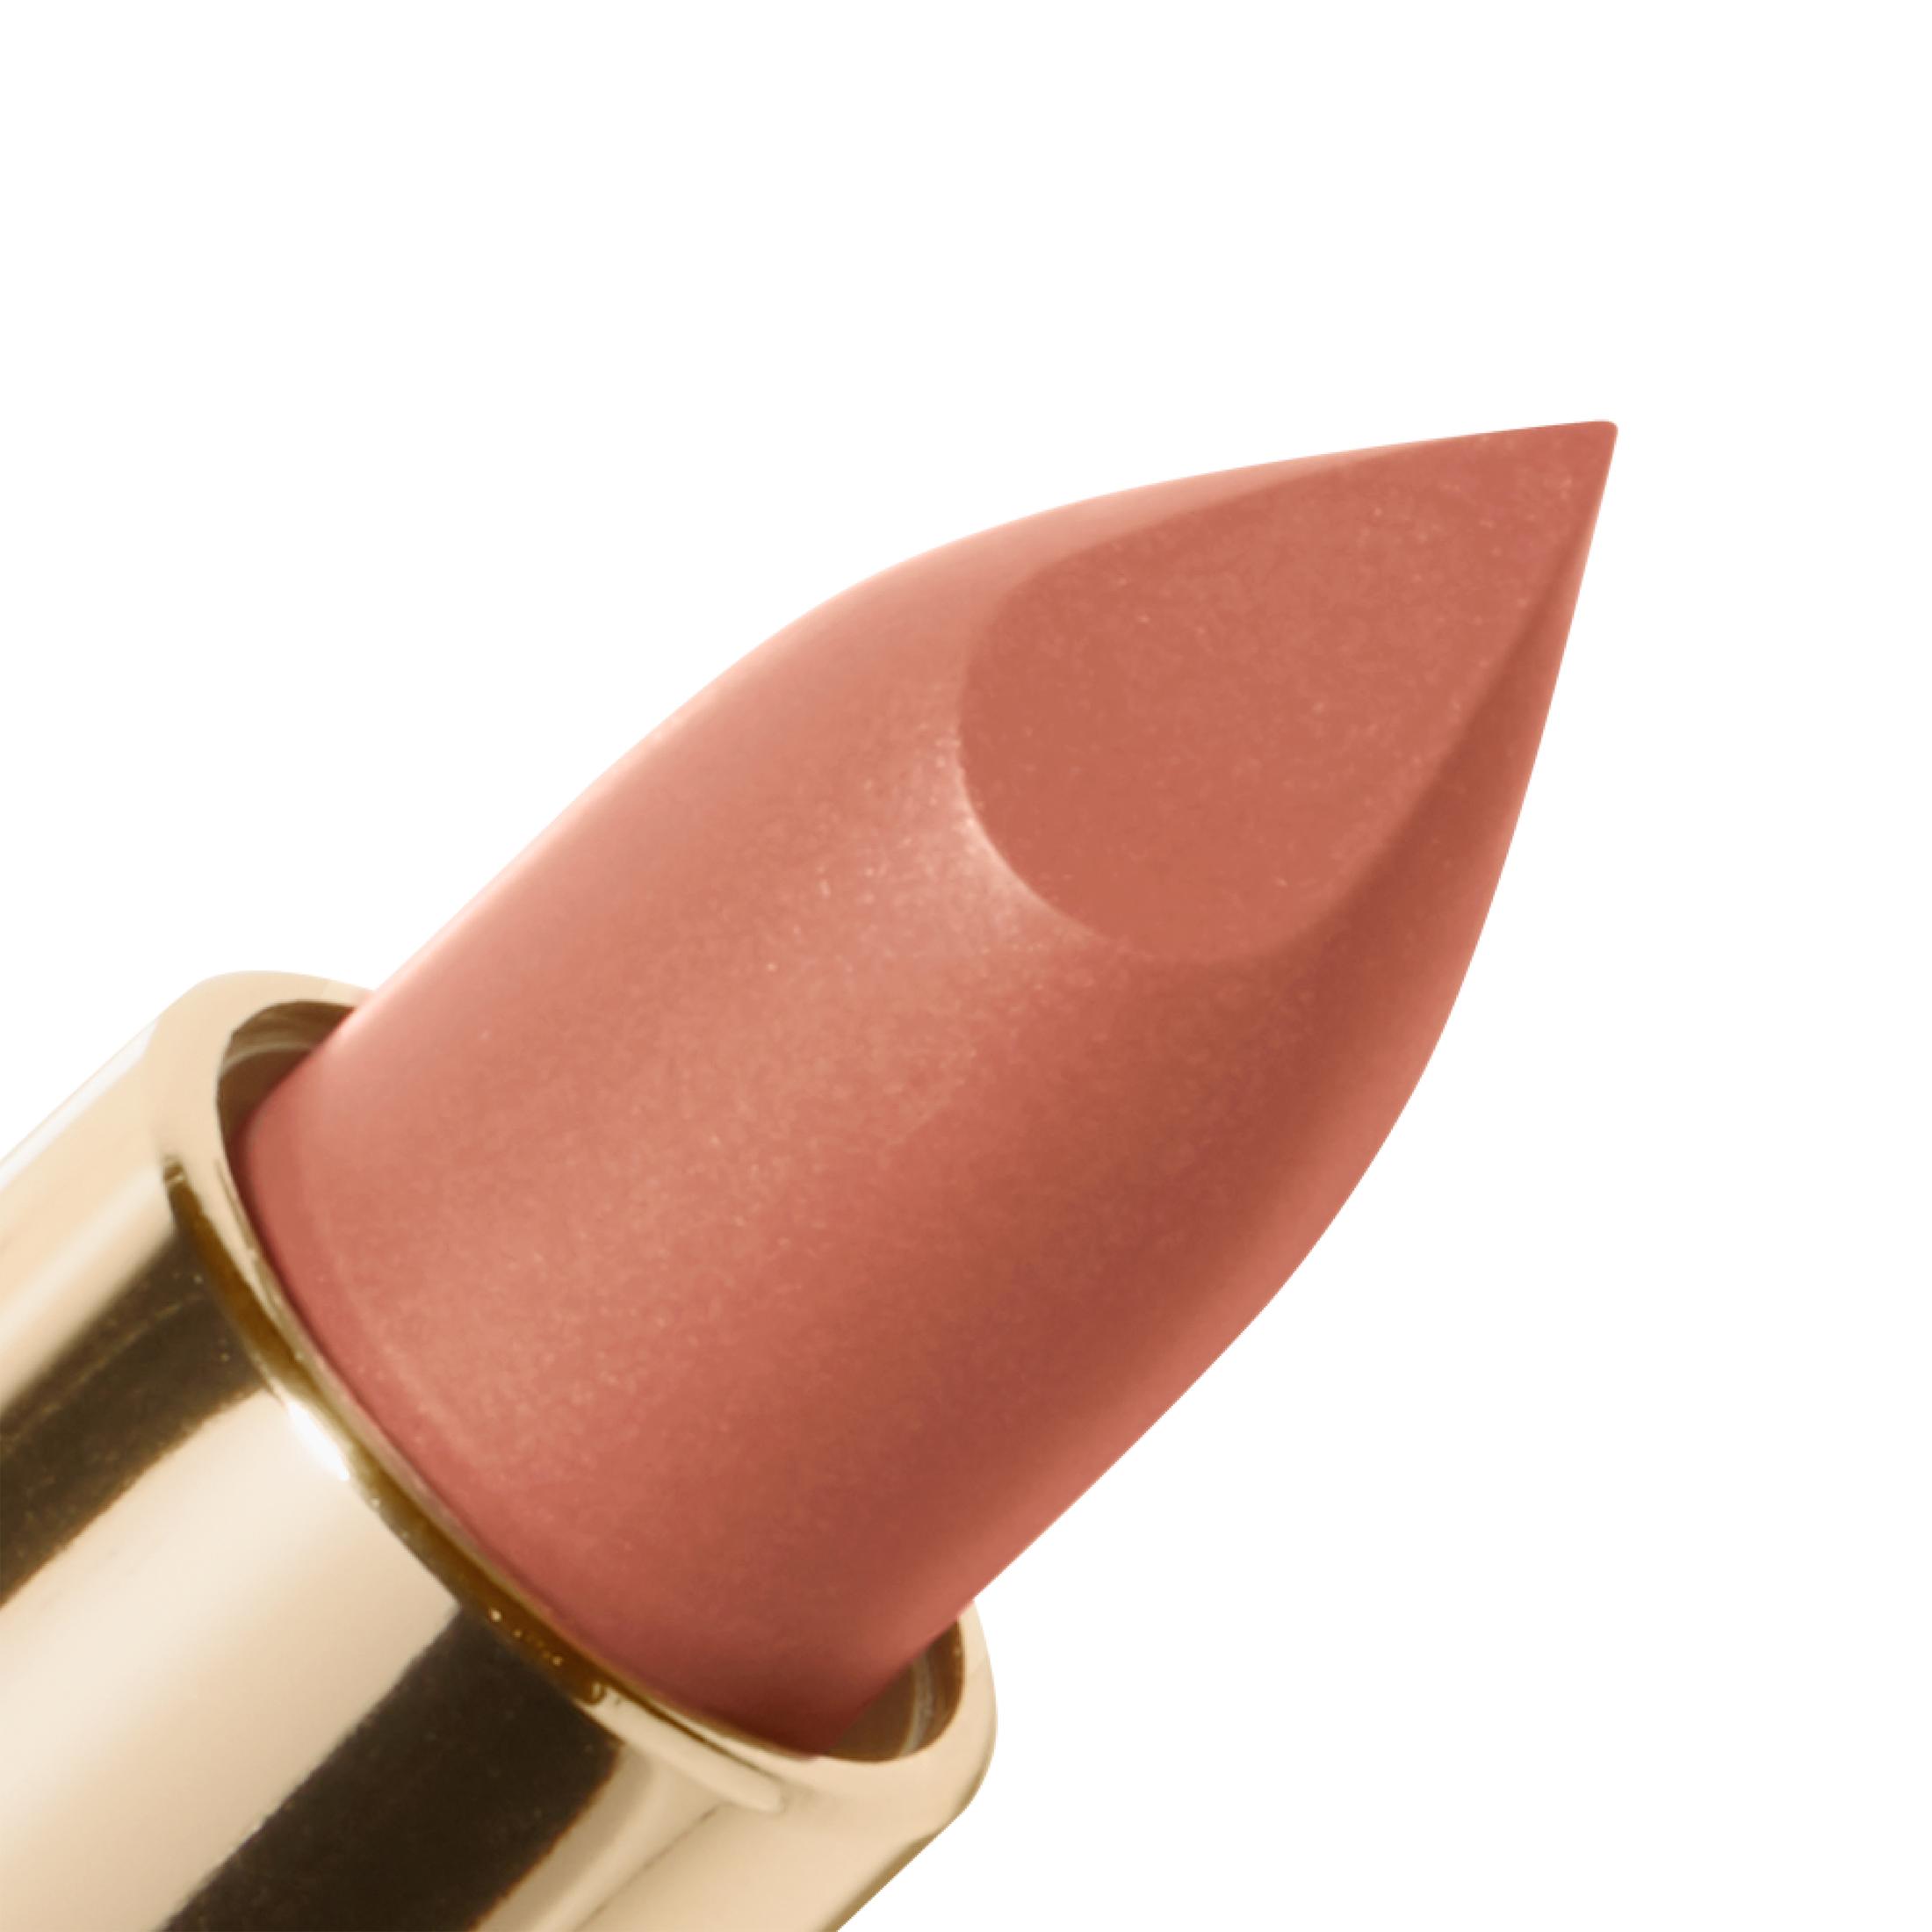 L'Oreal Paris Age Perfect Satin Lipstick, Glowing Nude - image 3 of 12